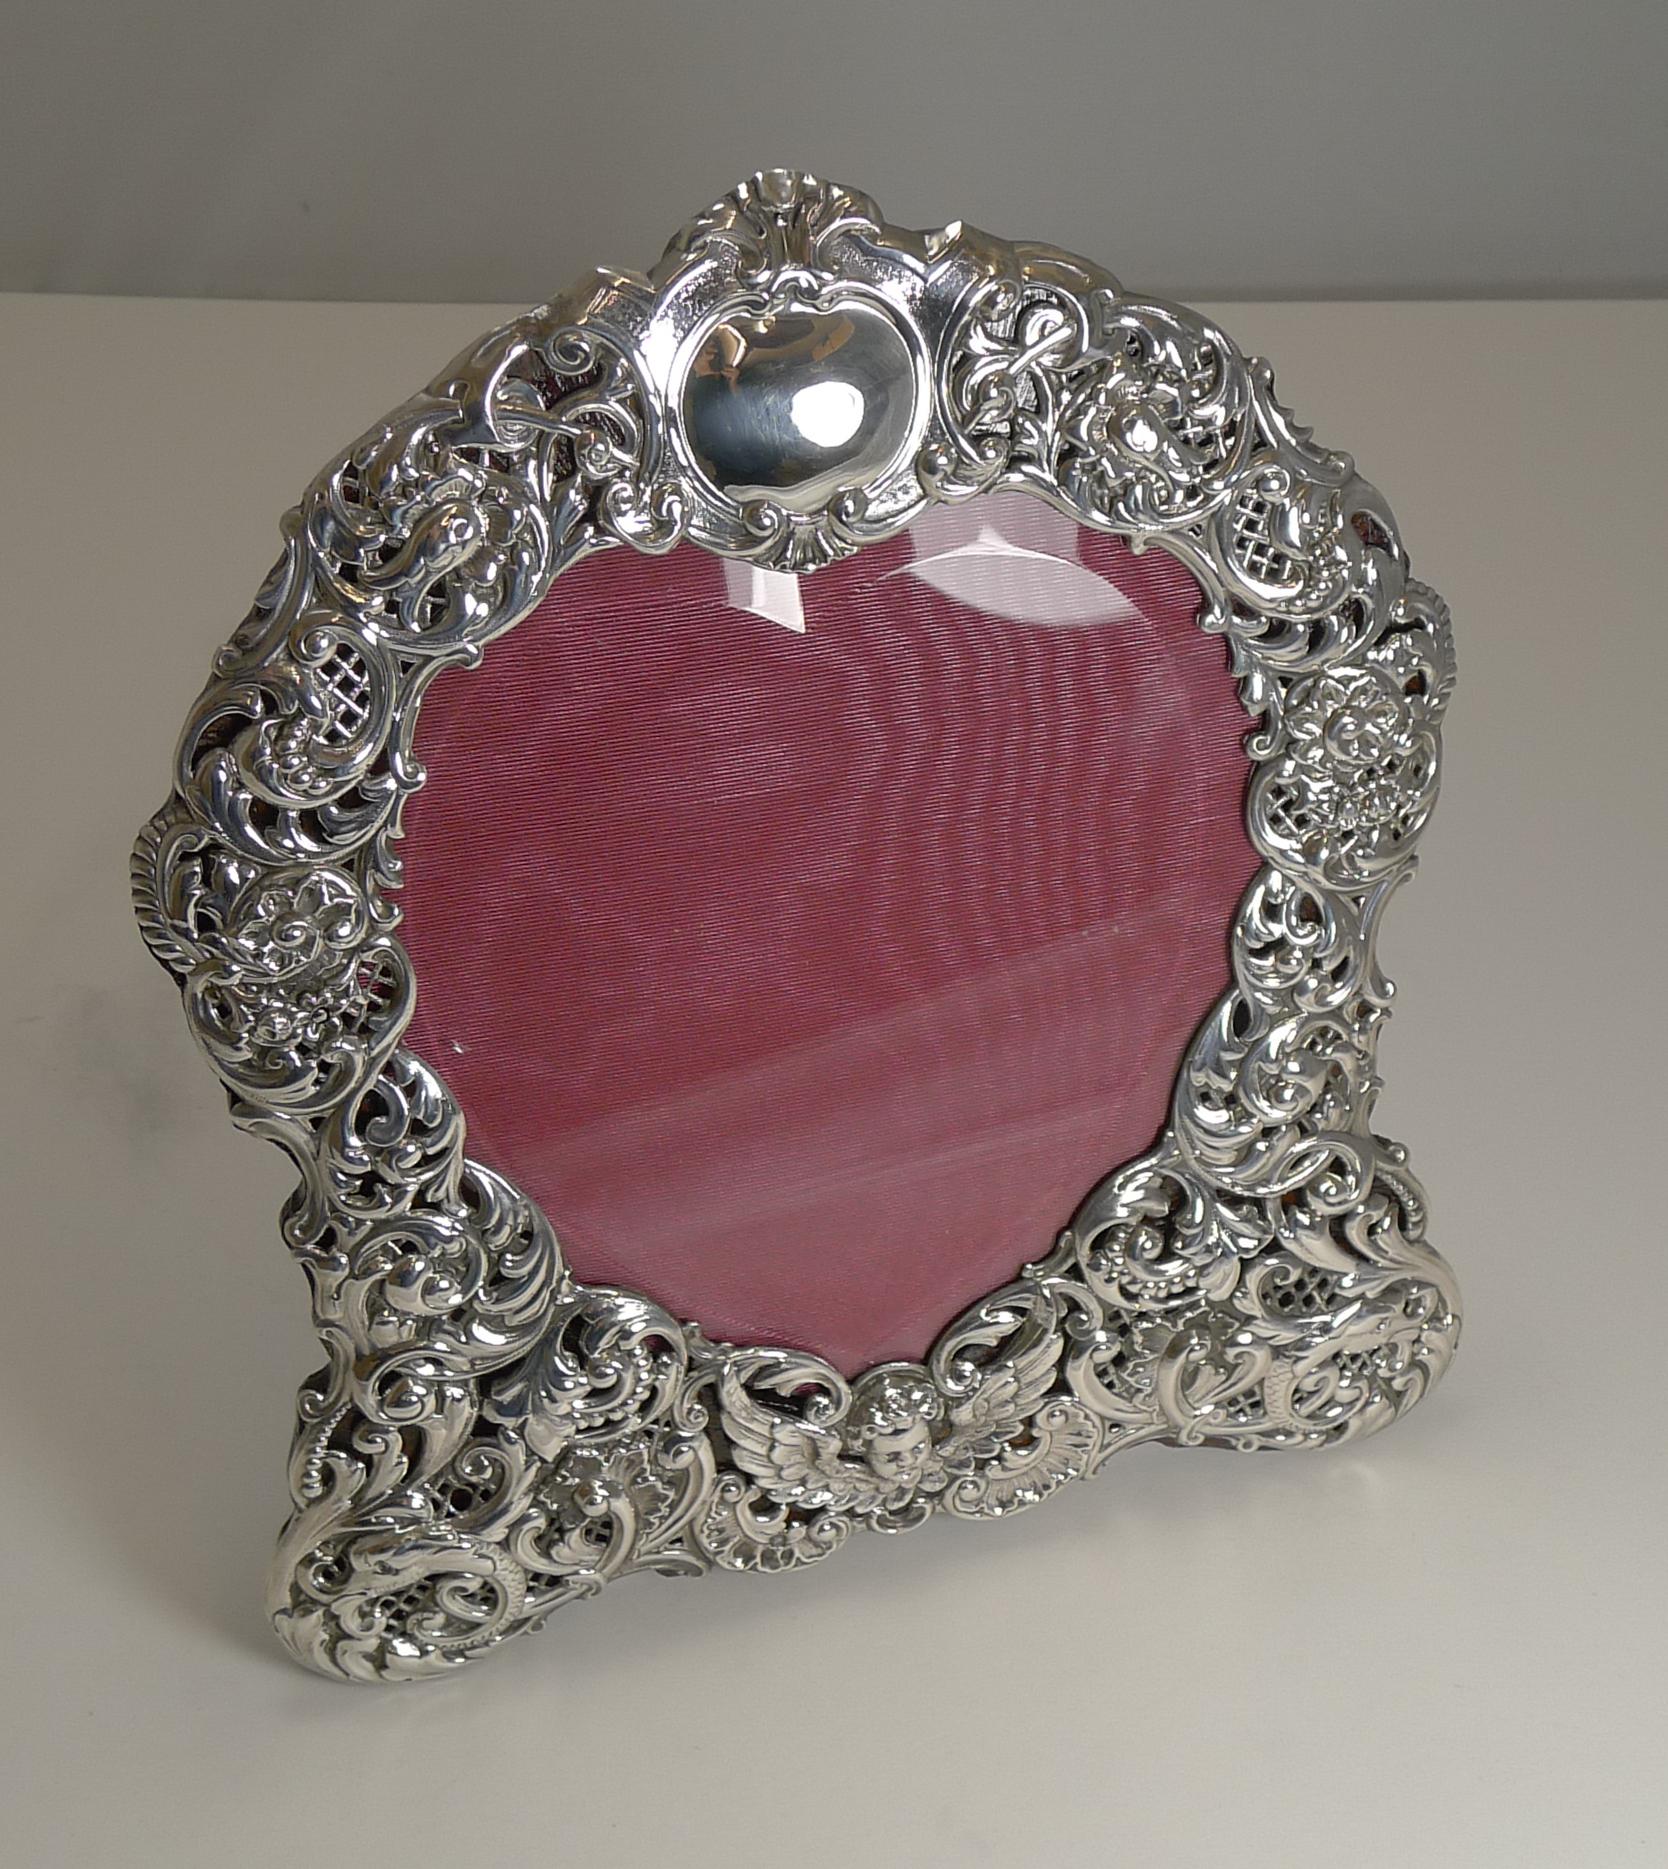 A grand large heart shaped photograph frame made from English sterling silver with intricate pierced or reticulated work incorporating Dolphins on either 